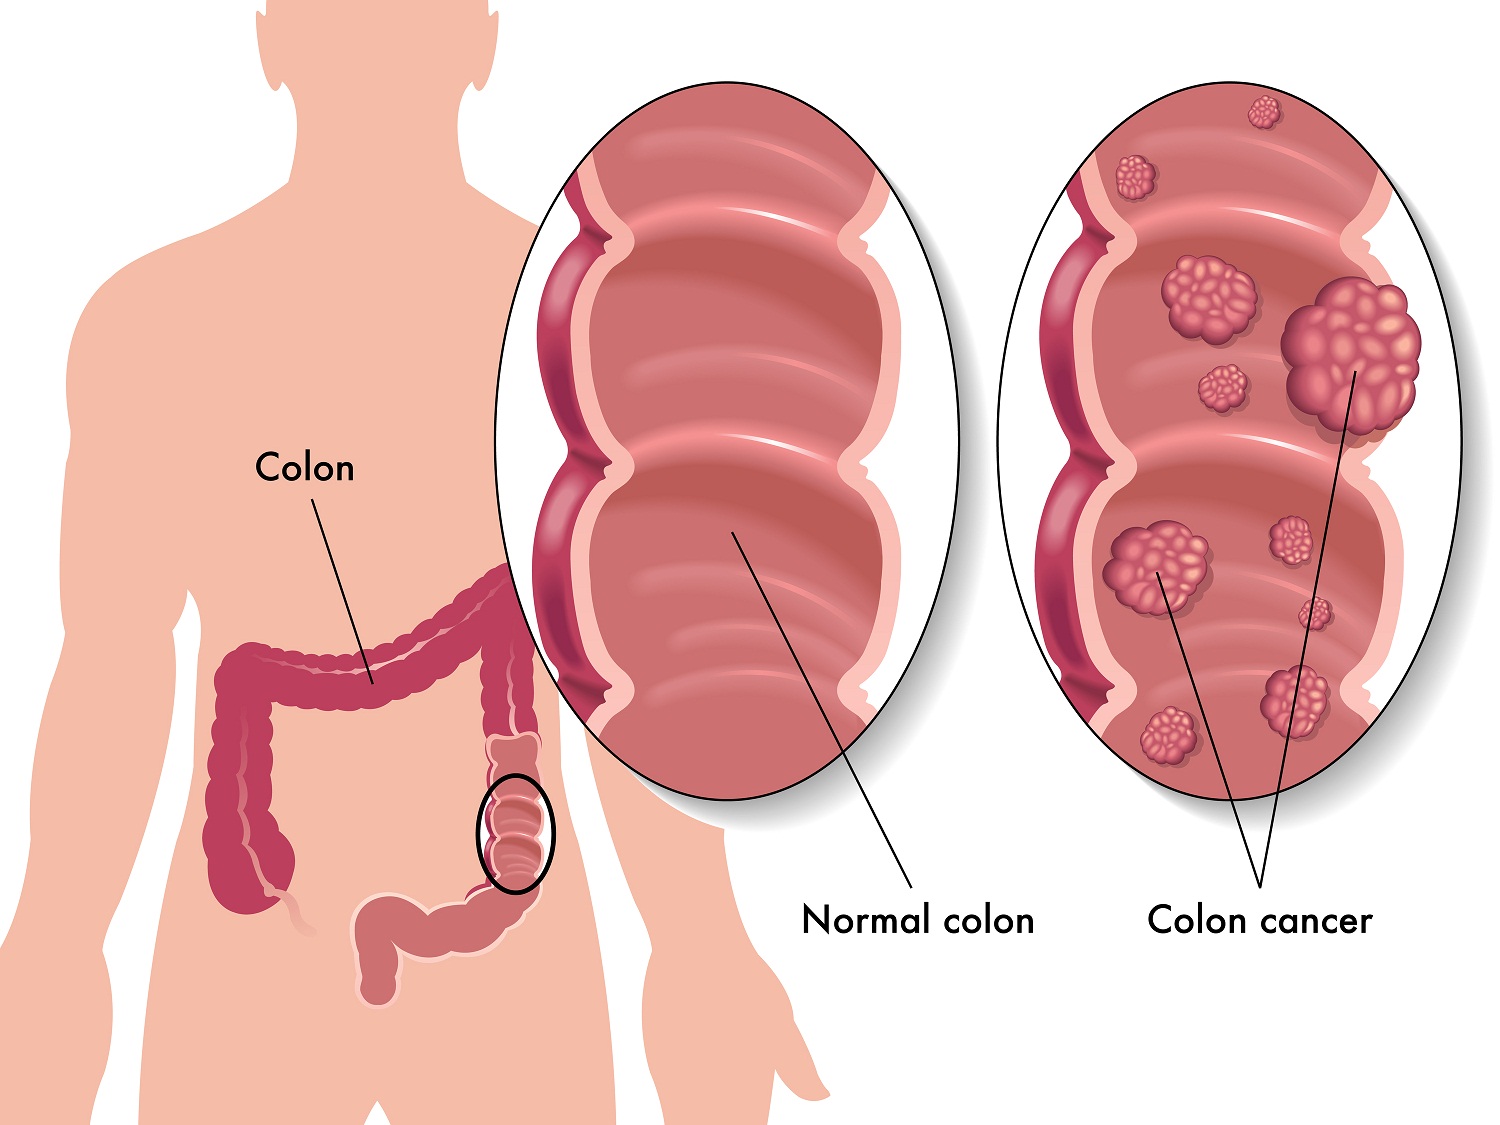 5 Ways To Reduce The Risk Of Colon Cancer